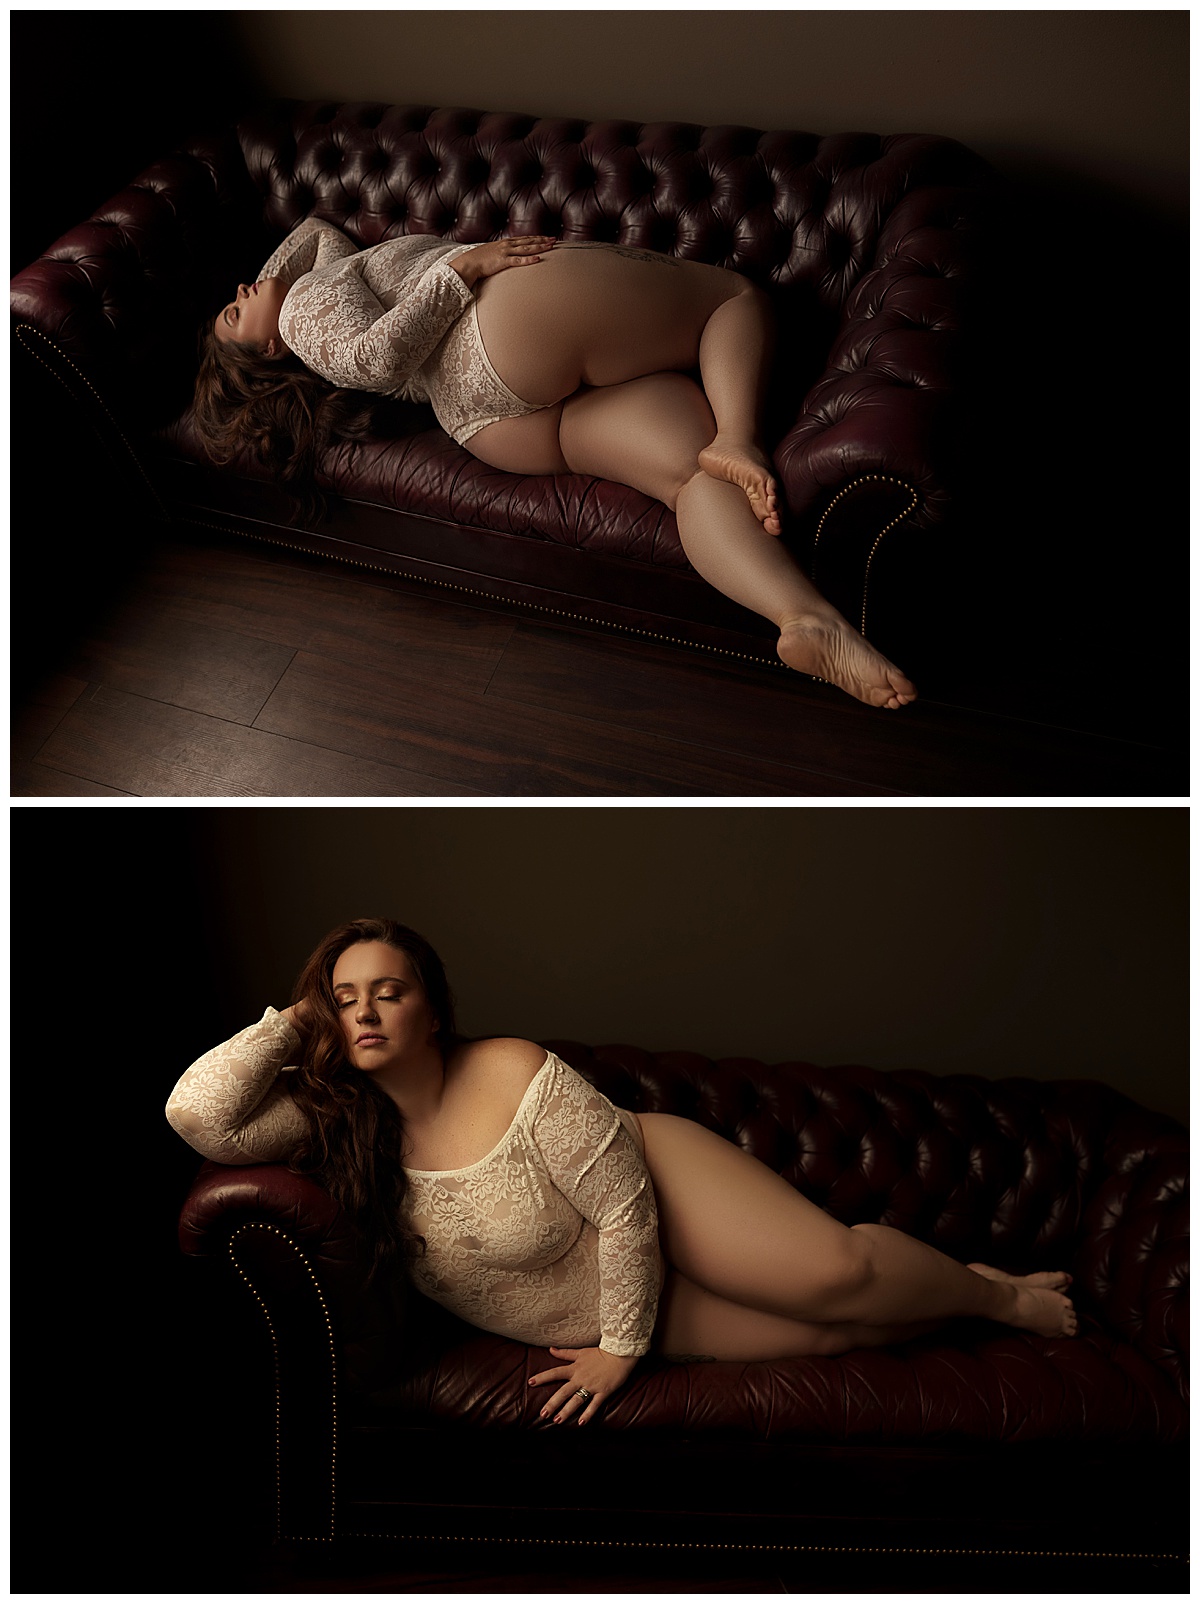 Female lays on the couch wearing lingerie for Emma Christine Photography